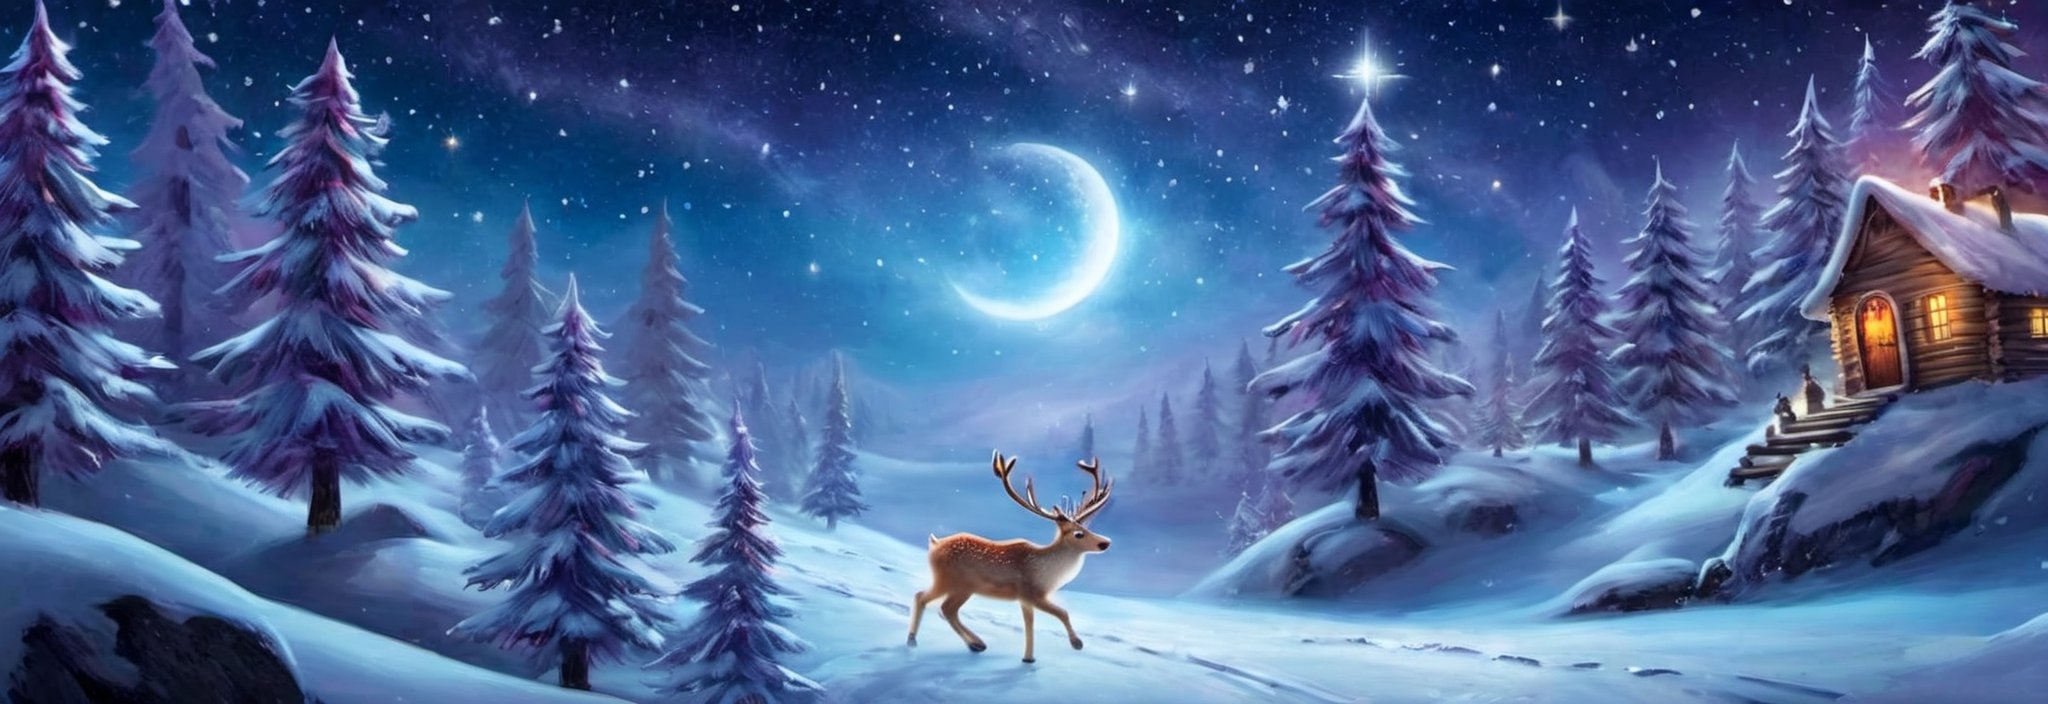 scene where a curious child ventures into a mystical forest and discovers a hidden doorway to a realm of twinkling stars and flying reindeer. The child embarks on a magical journey to the North Pole child's magical journey going off course, with the reindeer scattering and the starry realm in disarray. Depict the child's adventure taking an unexpected turn amidst the starlit chaos,6000